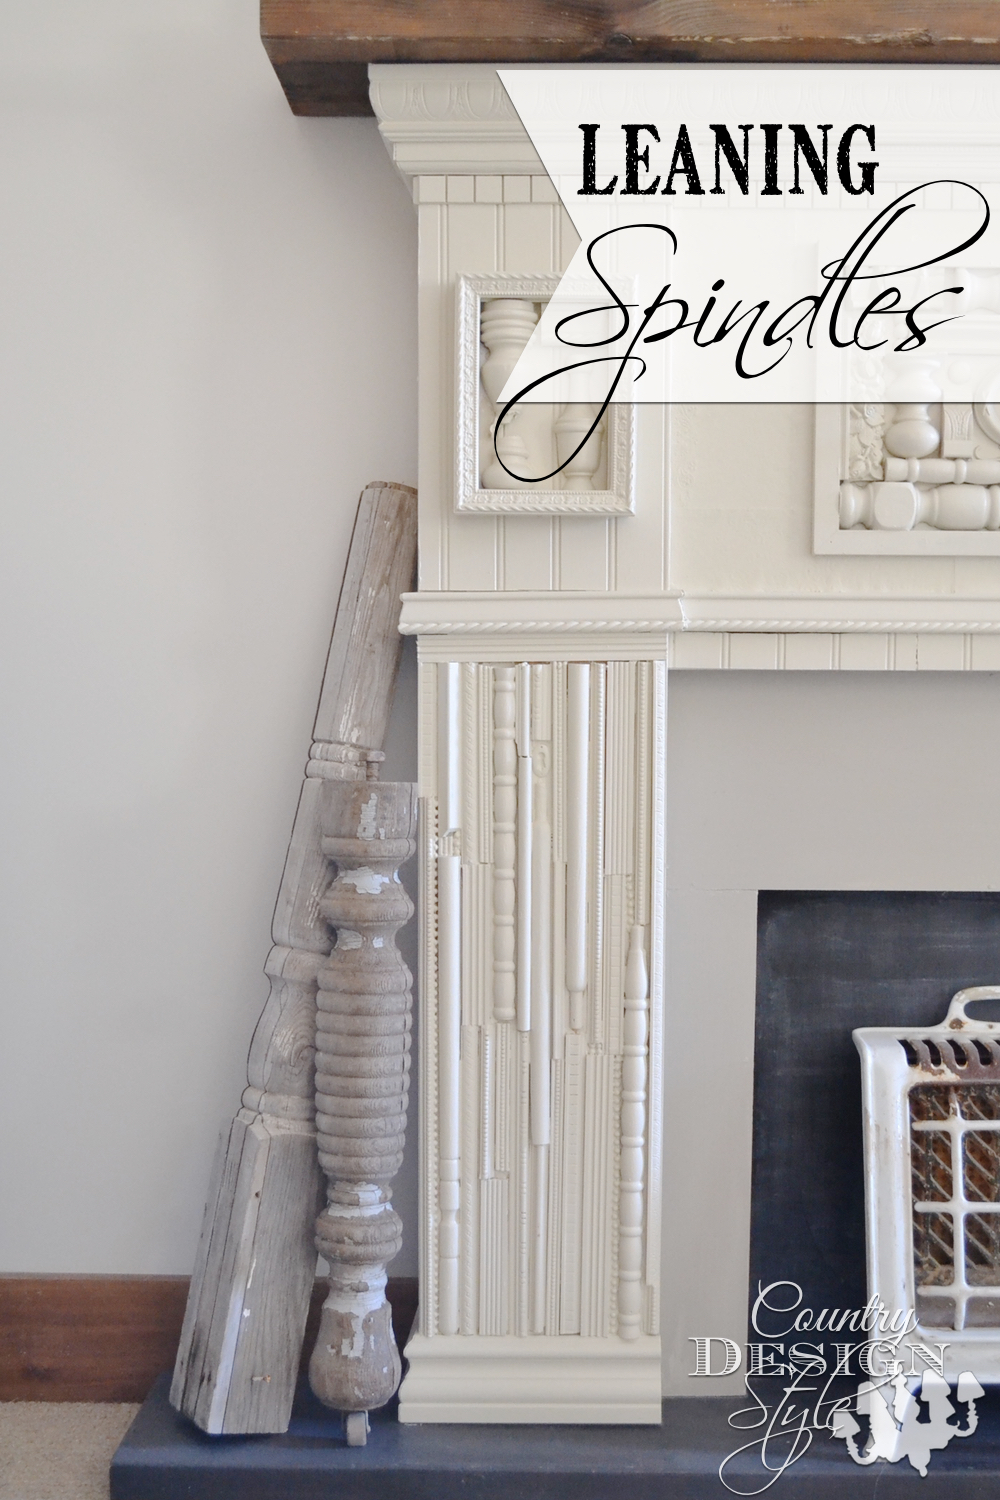 Display old spindles by leaning against a mantel or cabinet. Country Design Style